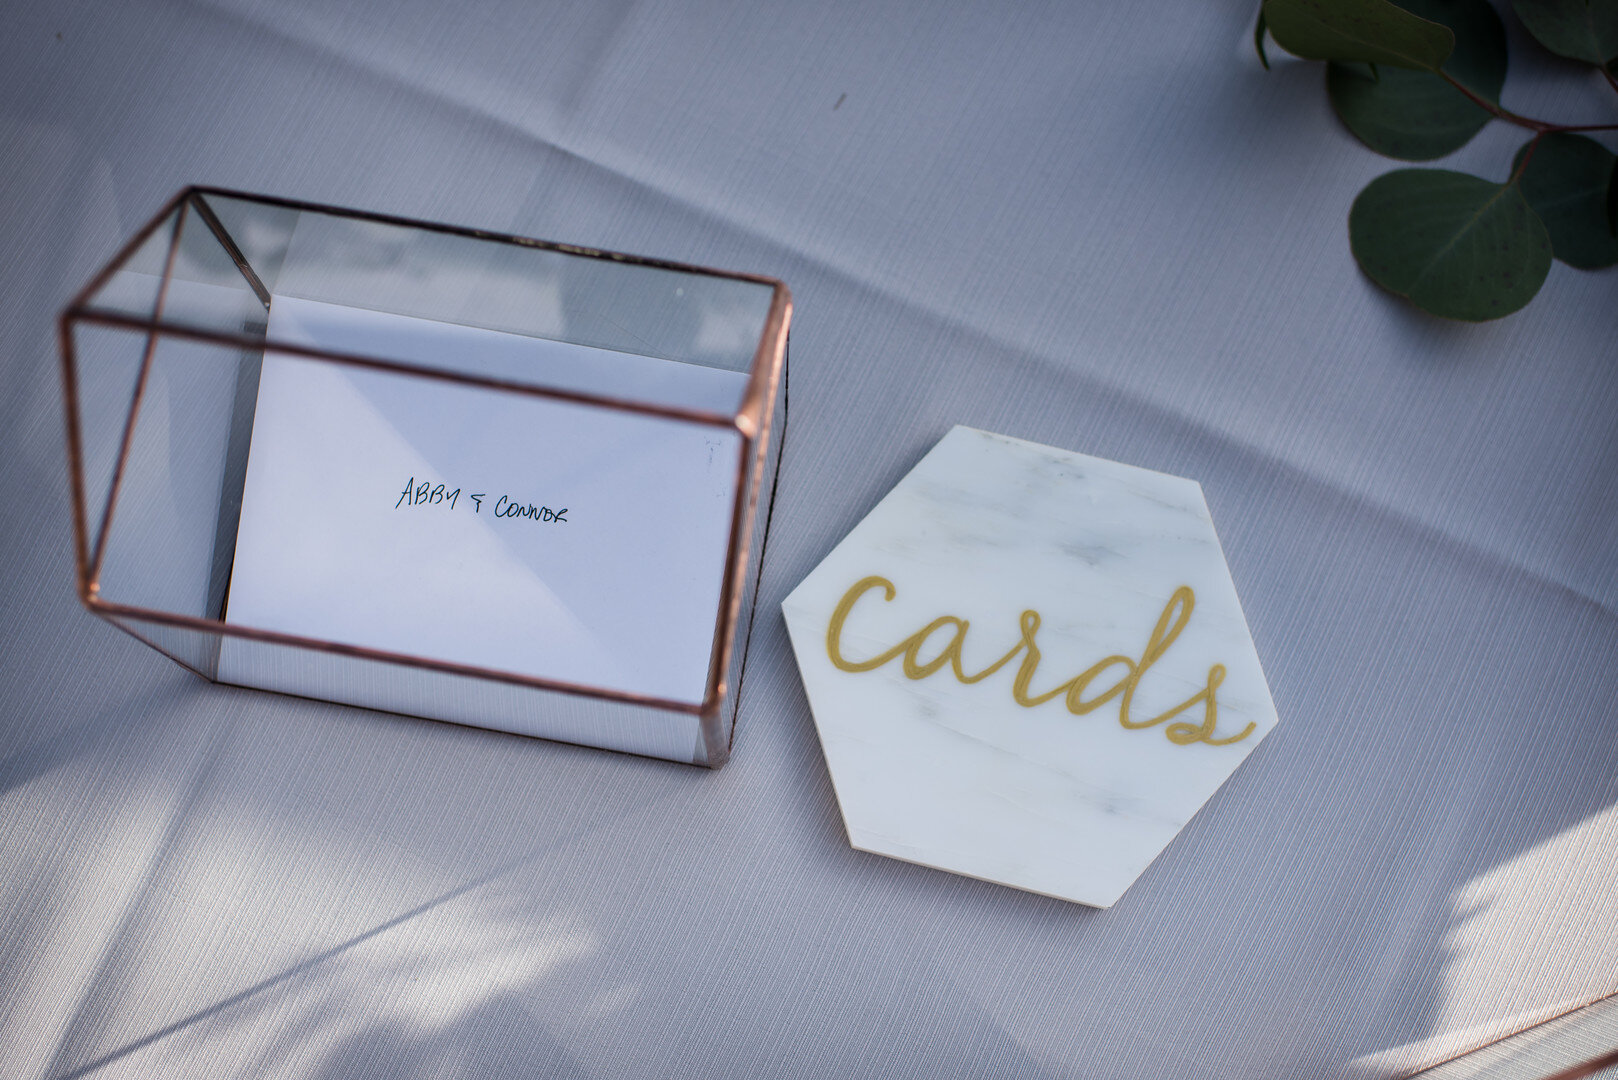 Geometric wedding card sign: Golden Hour Armour House Chicago Wedding captured by Inspired Eye Photography featured on CHI thee WED. Find more wedding ideas at CHItheeWED.com!